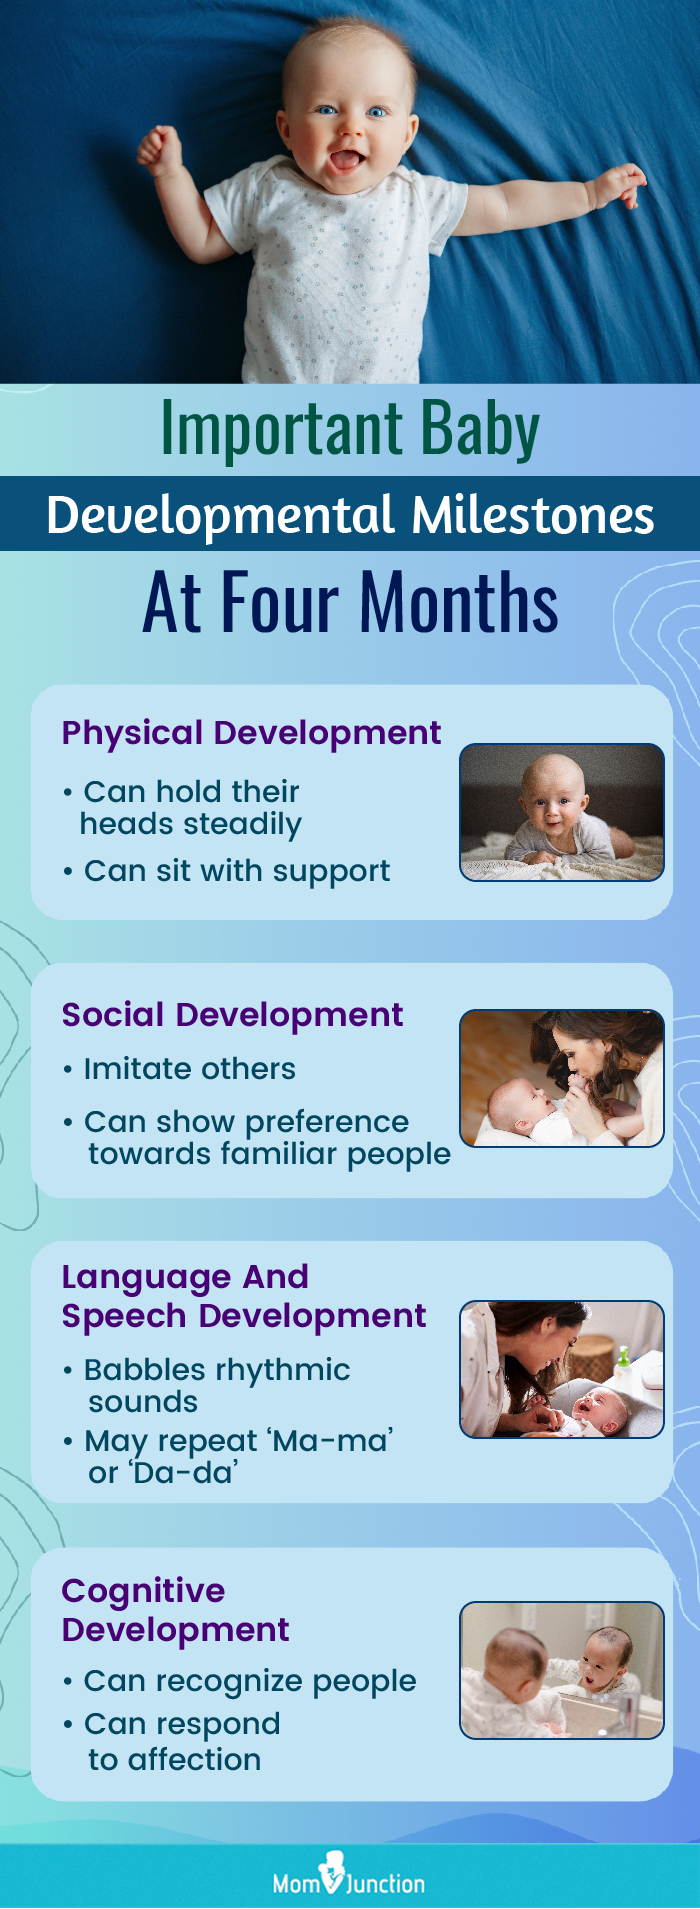 important baby developmental milestones at four months (infographic)